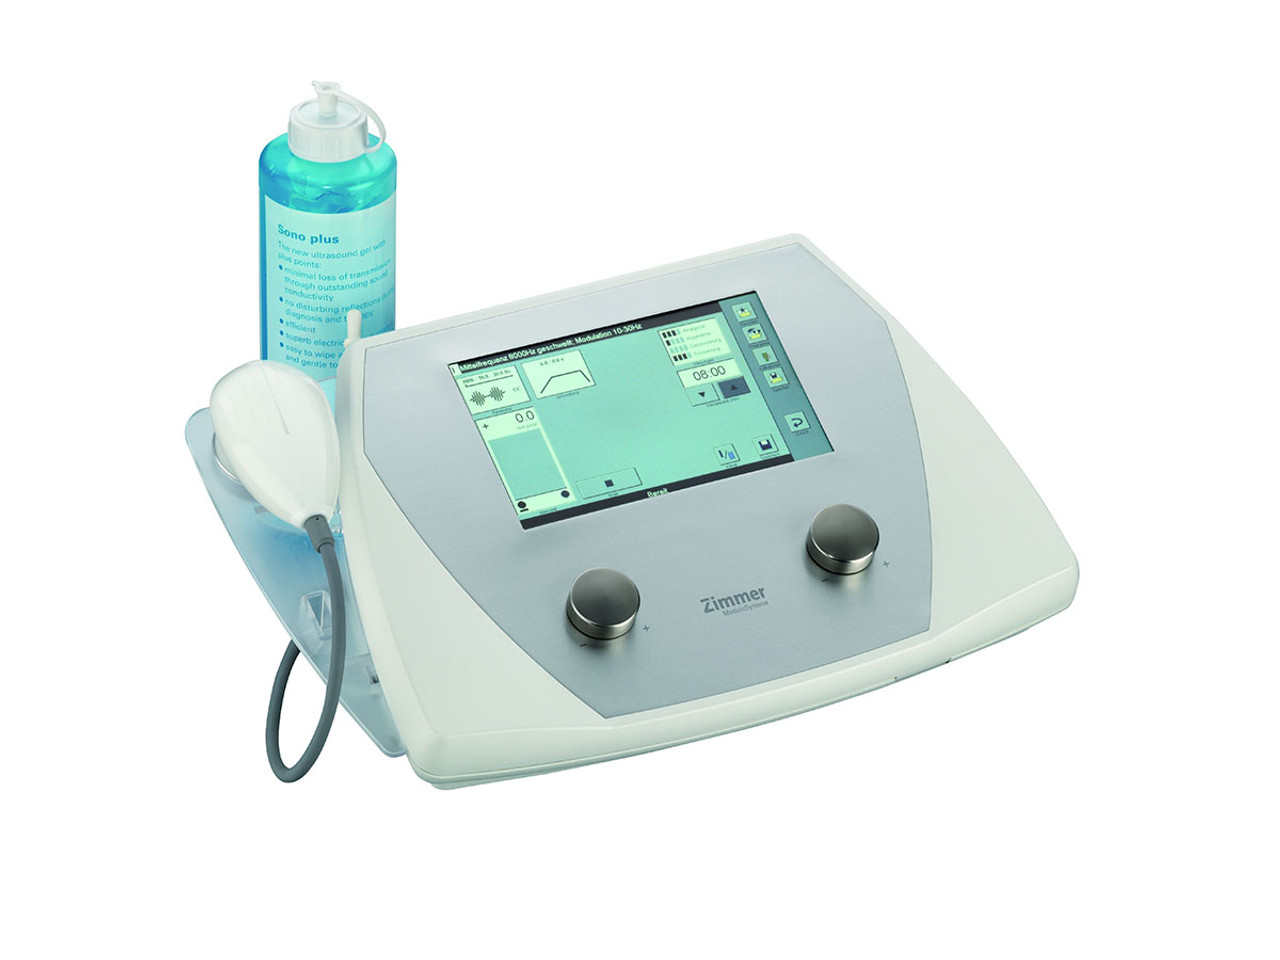 https://cdn11.bigcommerce.com/s-xot1sakfkb/images/stencil/1280x1280/products/17824/8609/Soleo_Sono_Ultrasound_Therapy_Device_5_cm_Ultrasound_Head__98409.1670625621.jpg?c=1